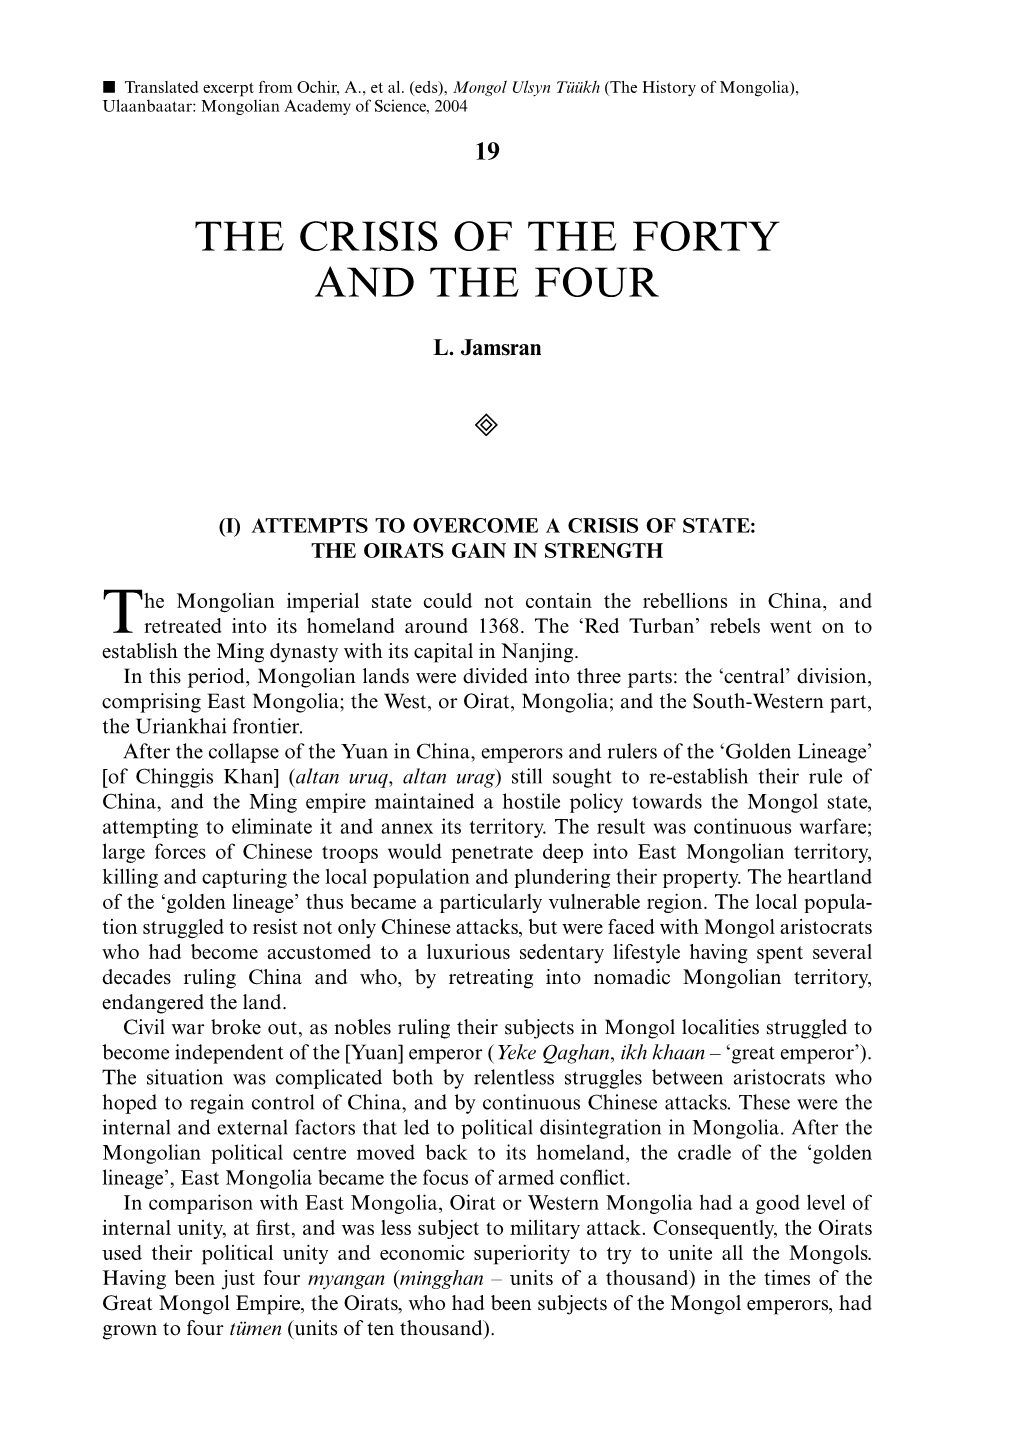 The Crisis of the Forty and the Four